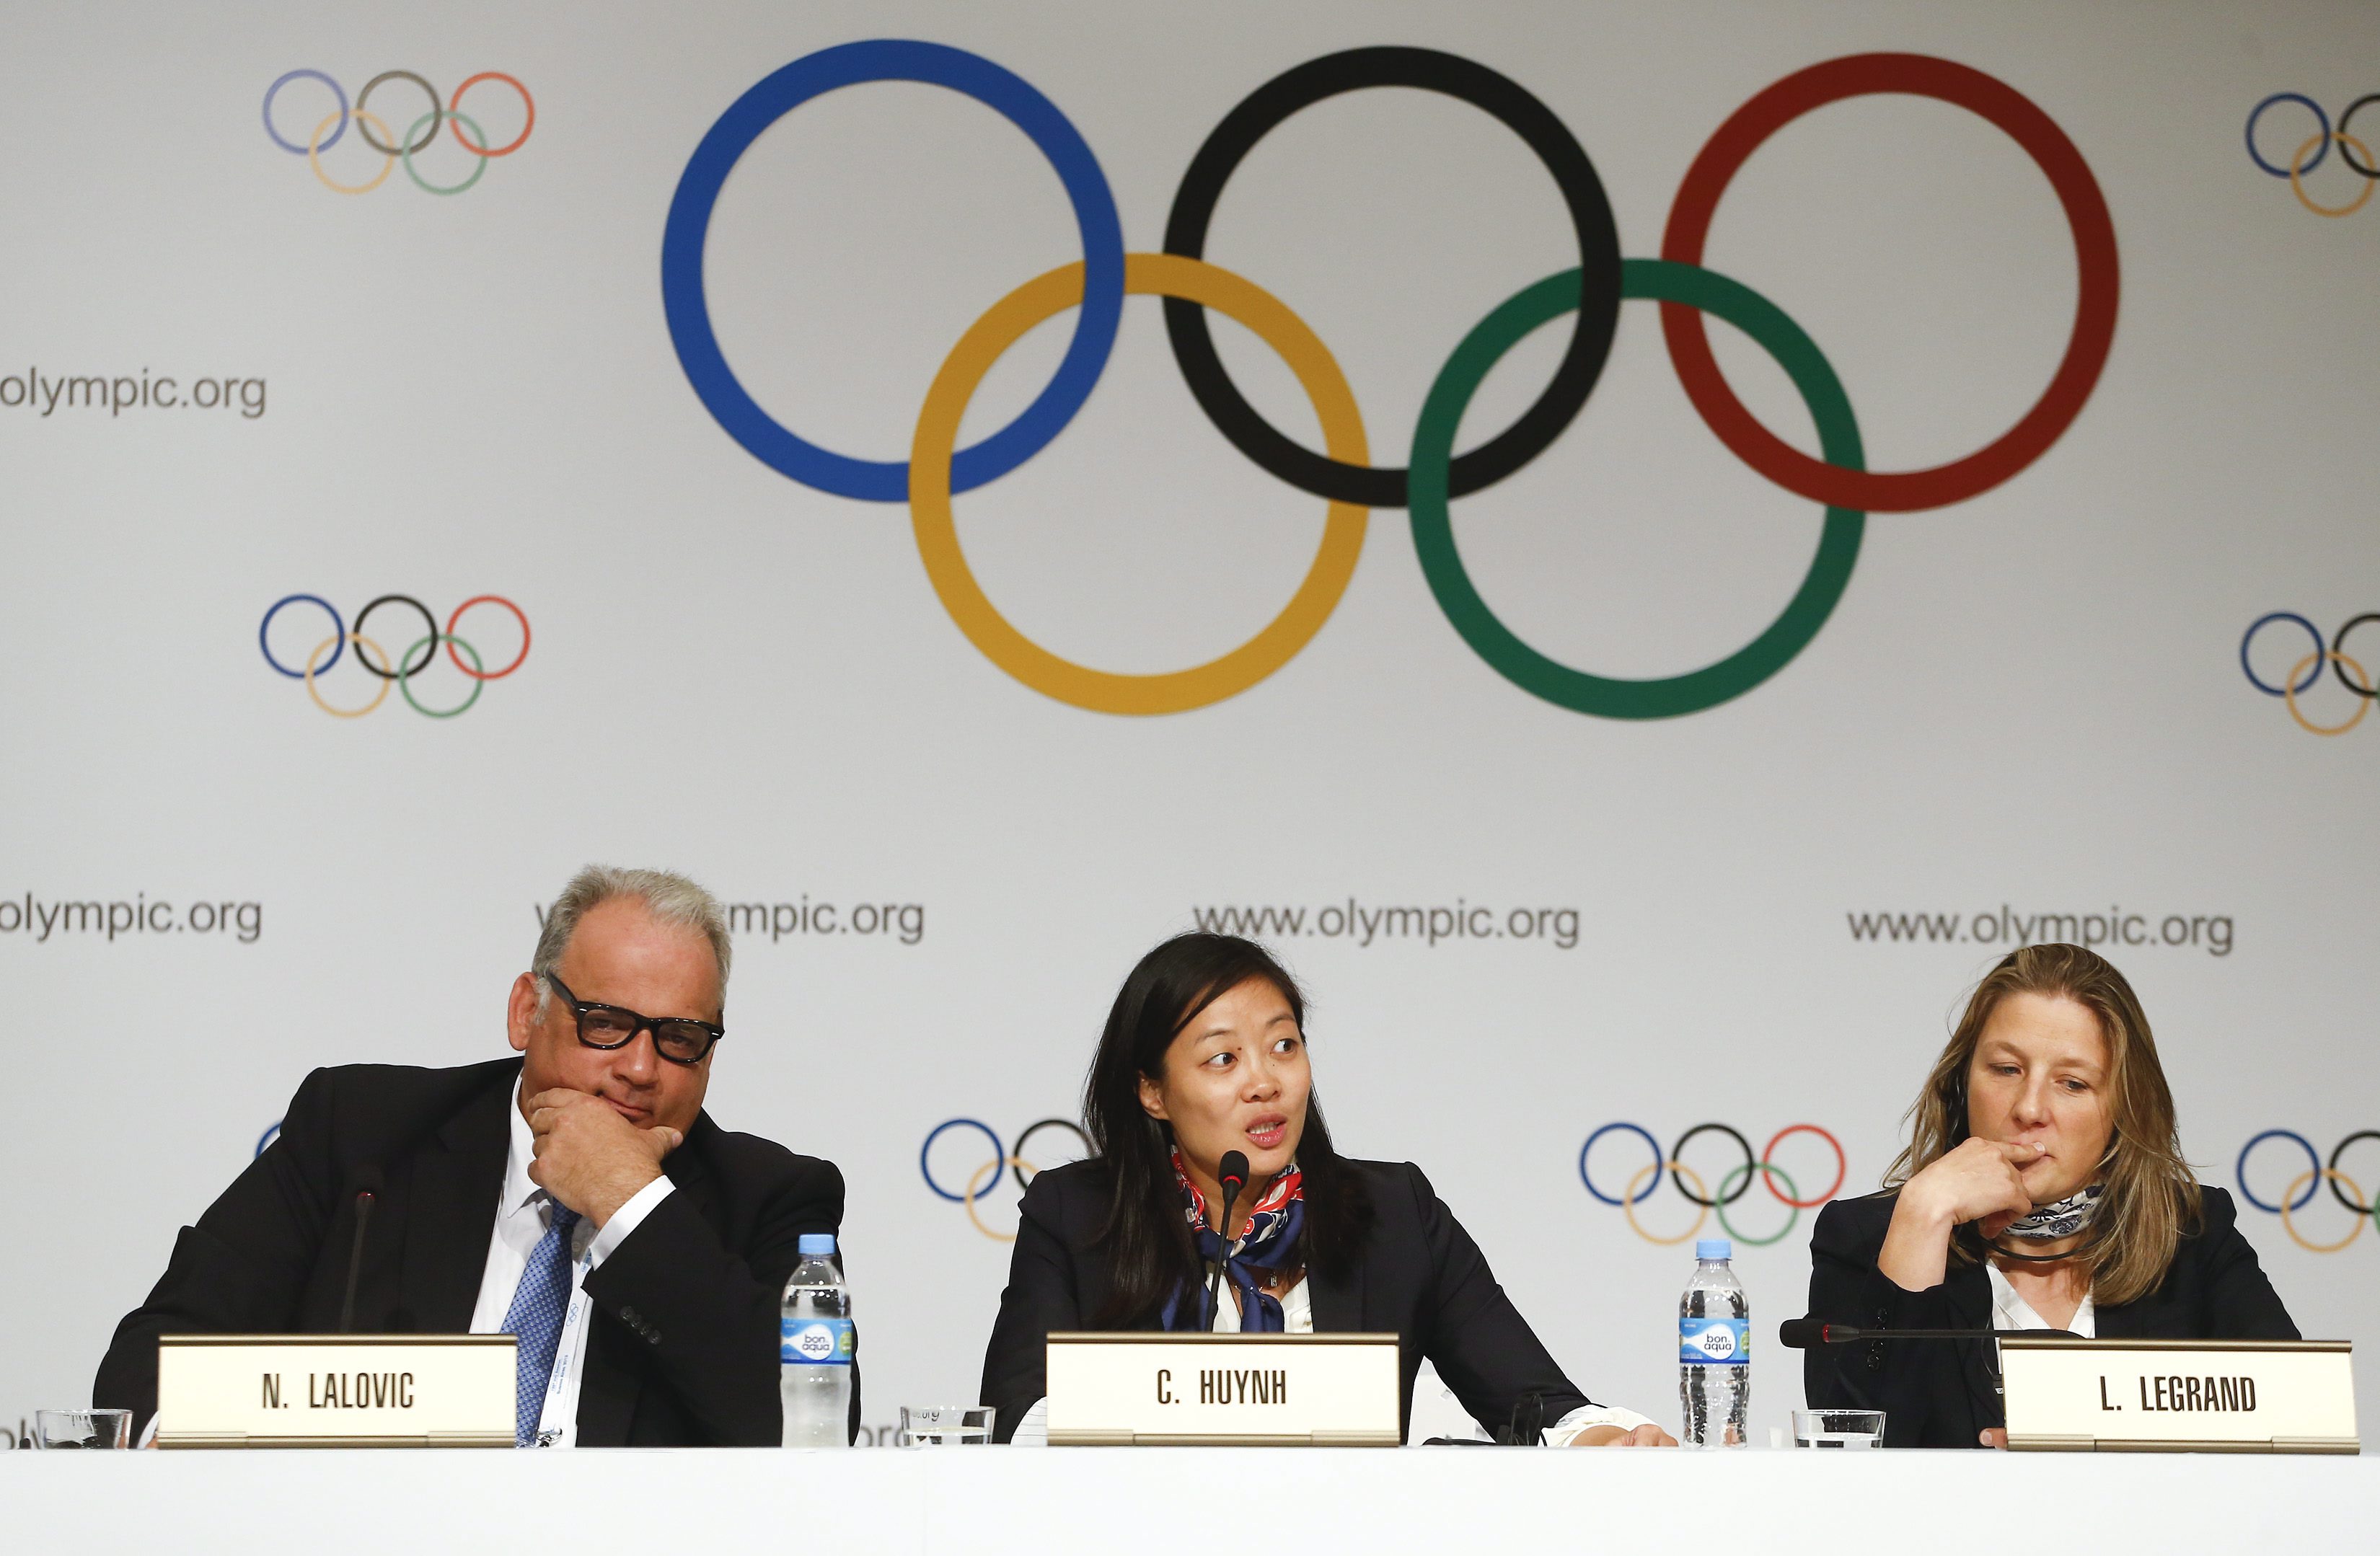 Canadian freestyle wrestler and olympic gold medalist Carol Huynh, center, speaks during a news conference in Buenos Aires, Argentina, Friday, Sept. 6, 2013. During the Sept. 4-10 International Olympic Committee (IOC) Executive Board meetings in Buenos Aires, members will vote on including one additional sport to the program of the 2020 and 2024 Games. Wrestling is up against squash and a combined baseball-softball bid. Huynh is flanked by Nenad Lalovic, head of the International Federation of Associated Wrestling Styles (FILA), left, and Lise Legrand, vice president of the French Wrestling Federation. (AP Photo/Victor R. Caivano)